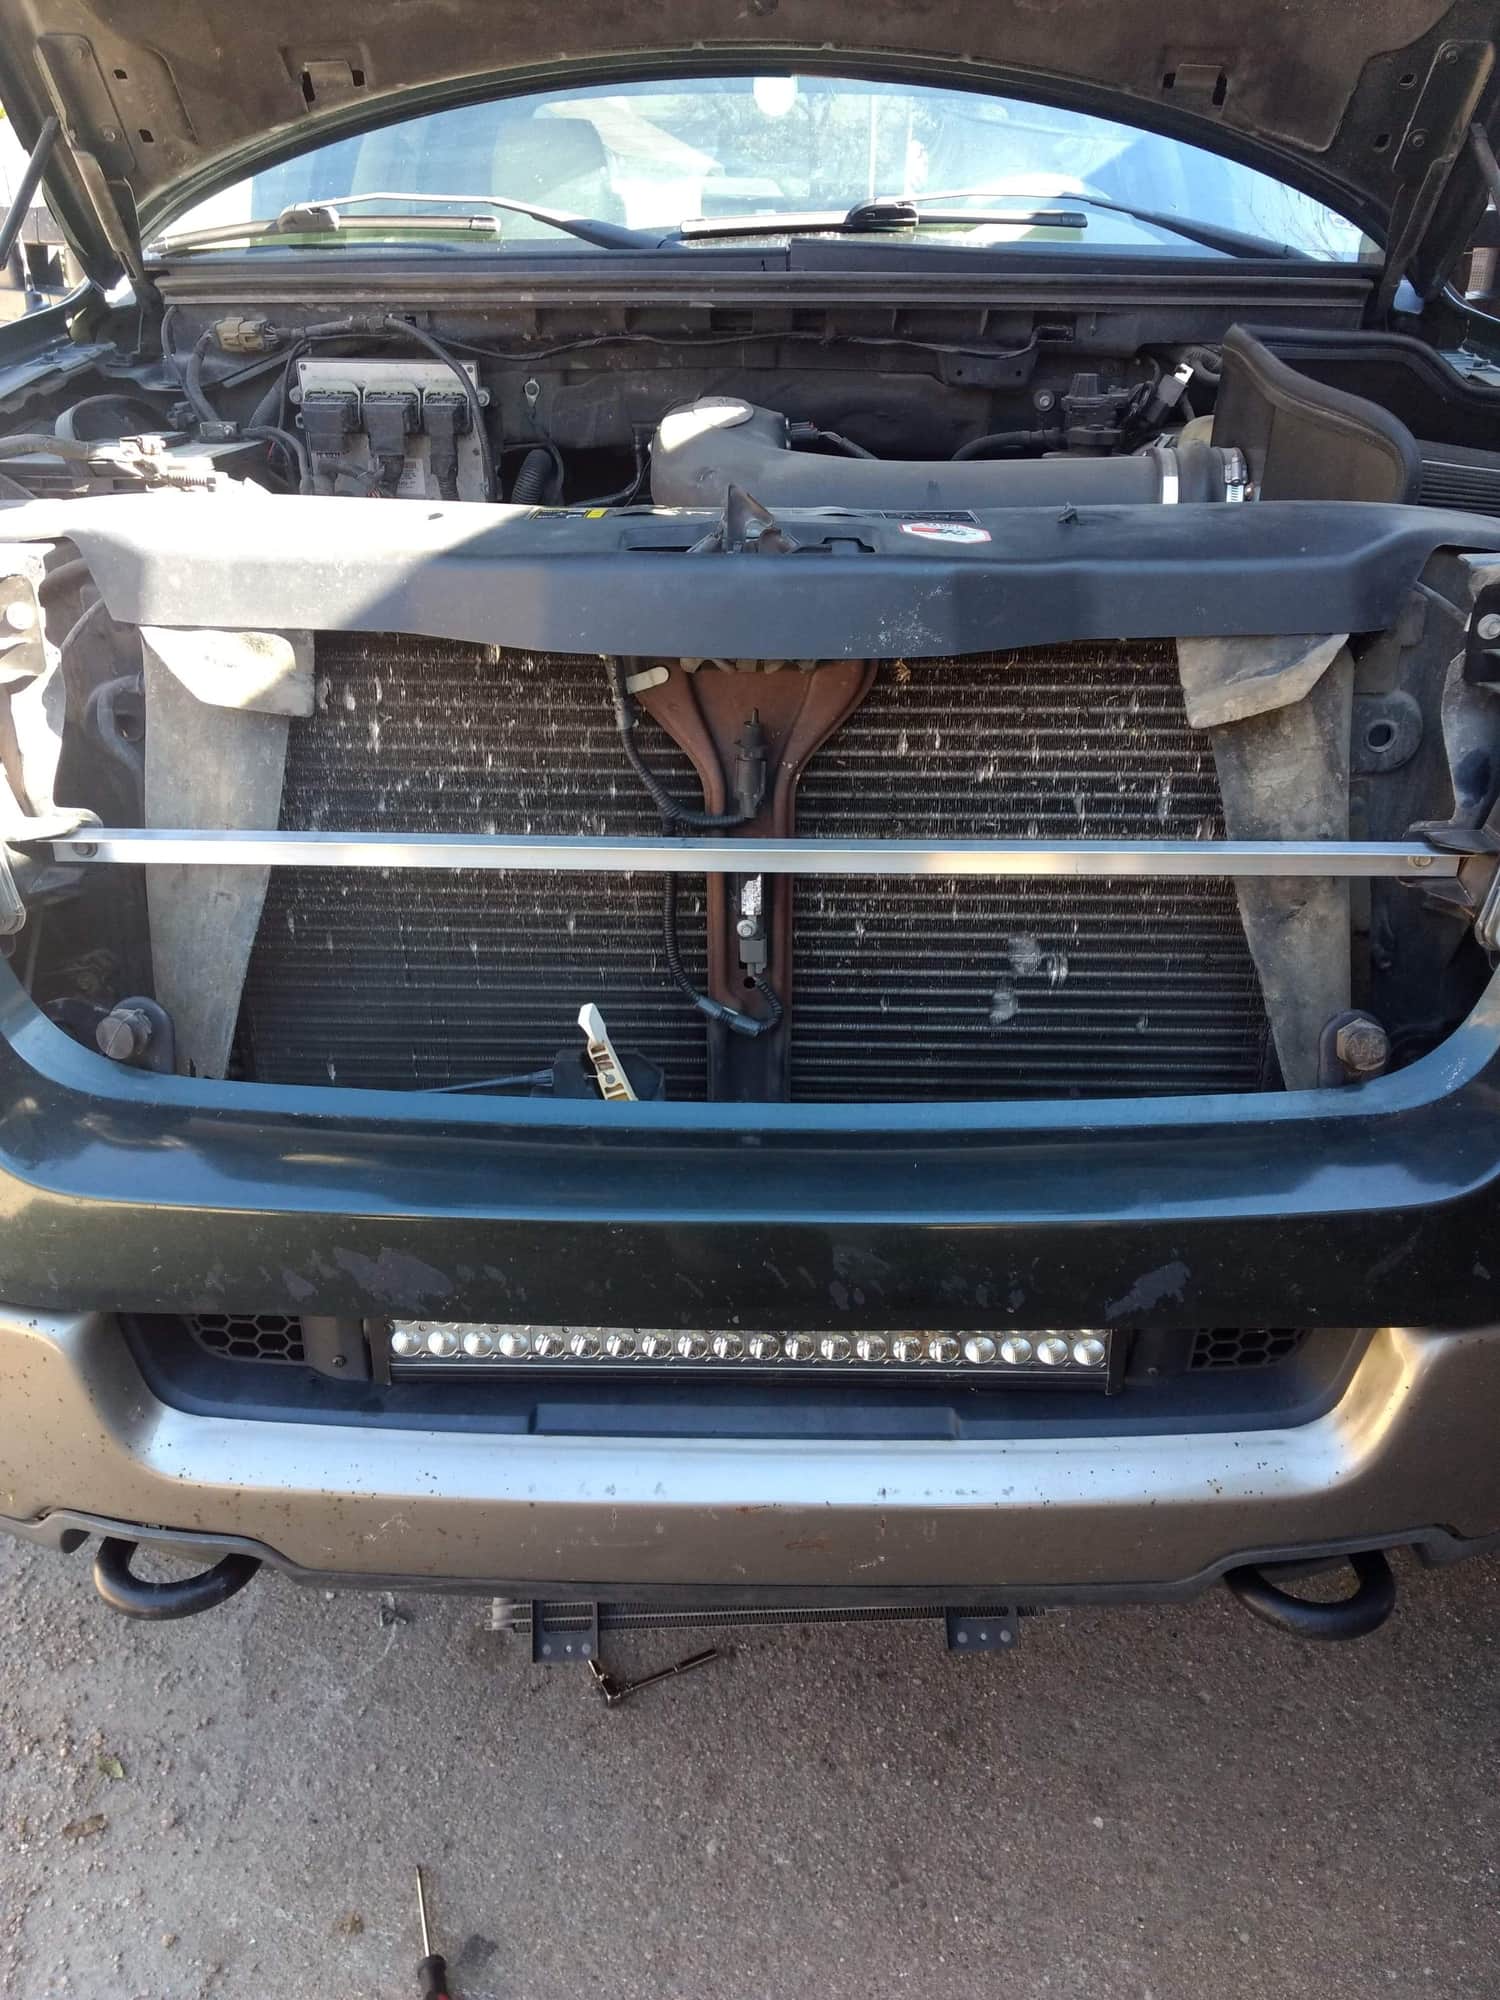 12000 lb winch in front bumper of 04 f150 lariat - Ford F150 Forum -  Community of Ford Truck Fans